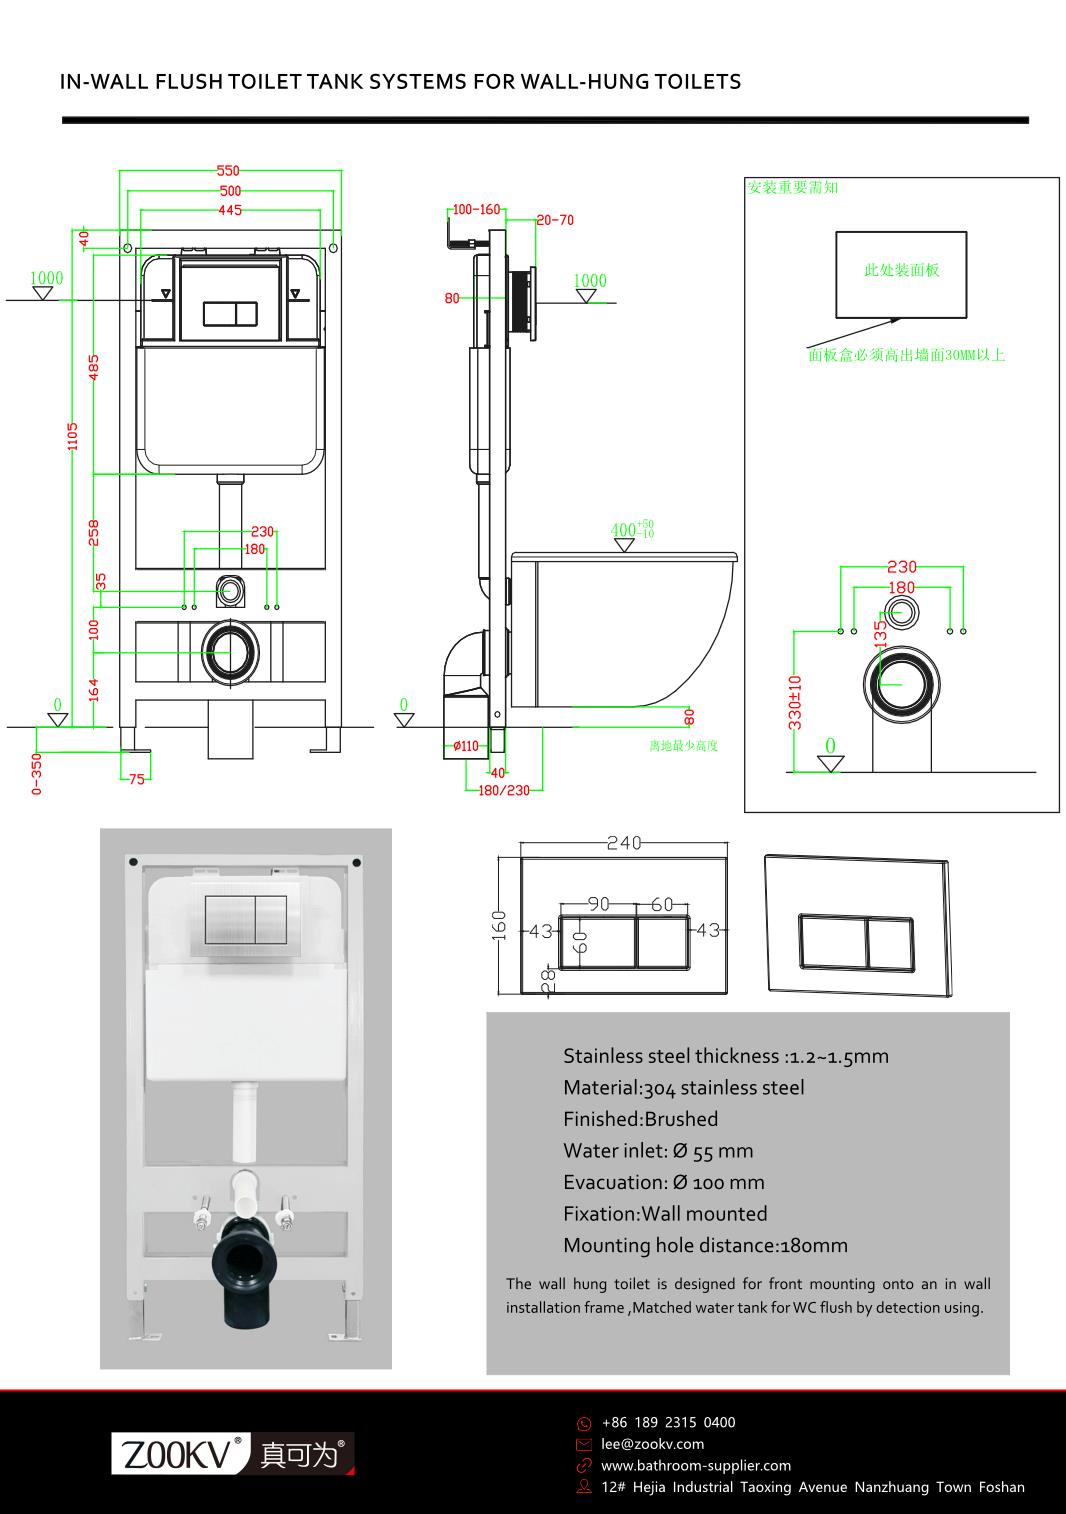 IN-WALL FLUSH TOILET TANK SYSTEMS FOR WALL-HUNG TOILETS.jpg